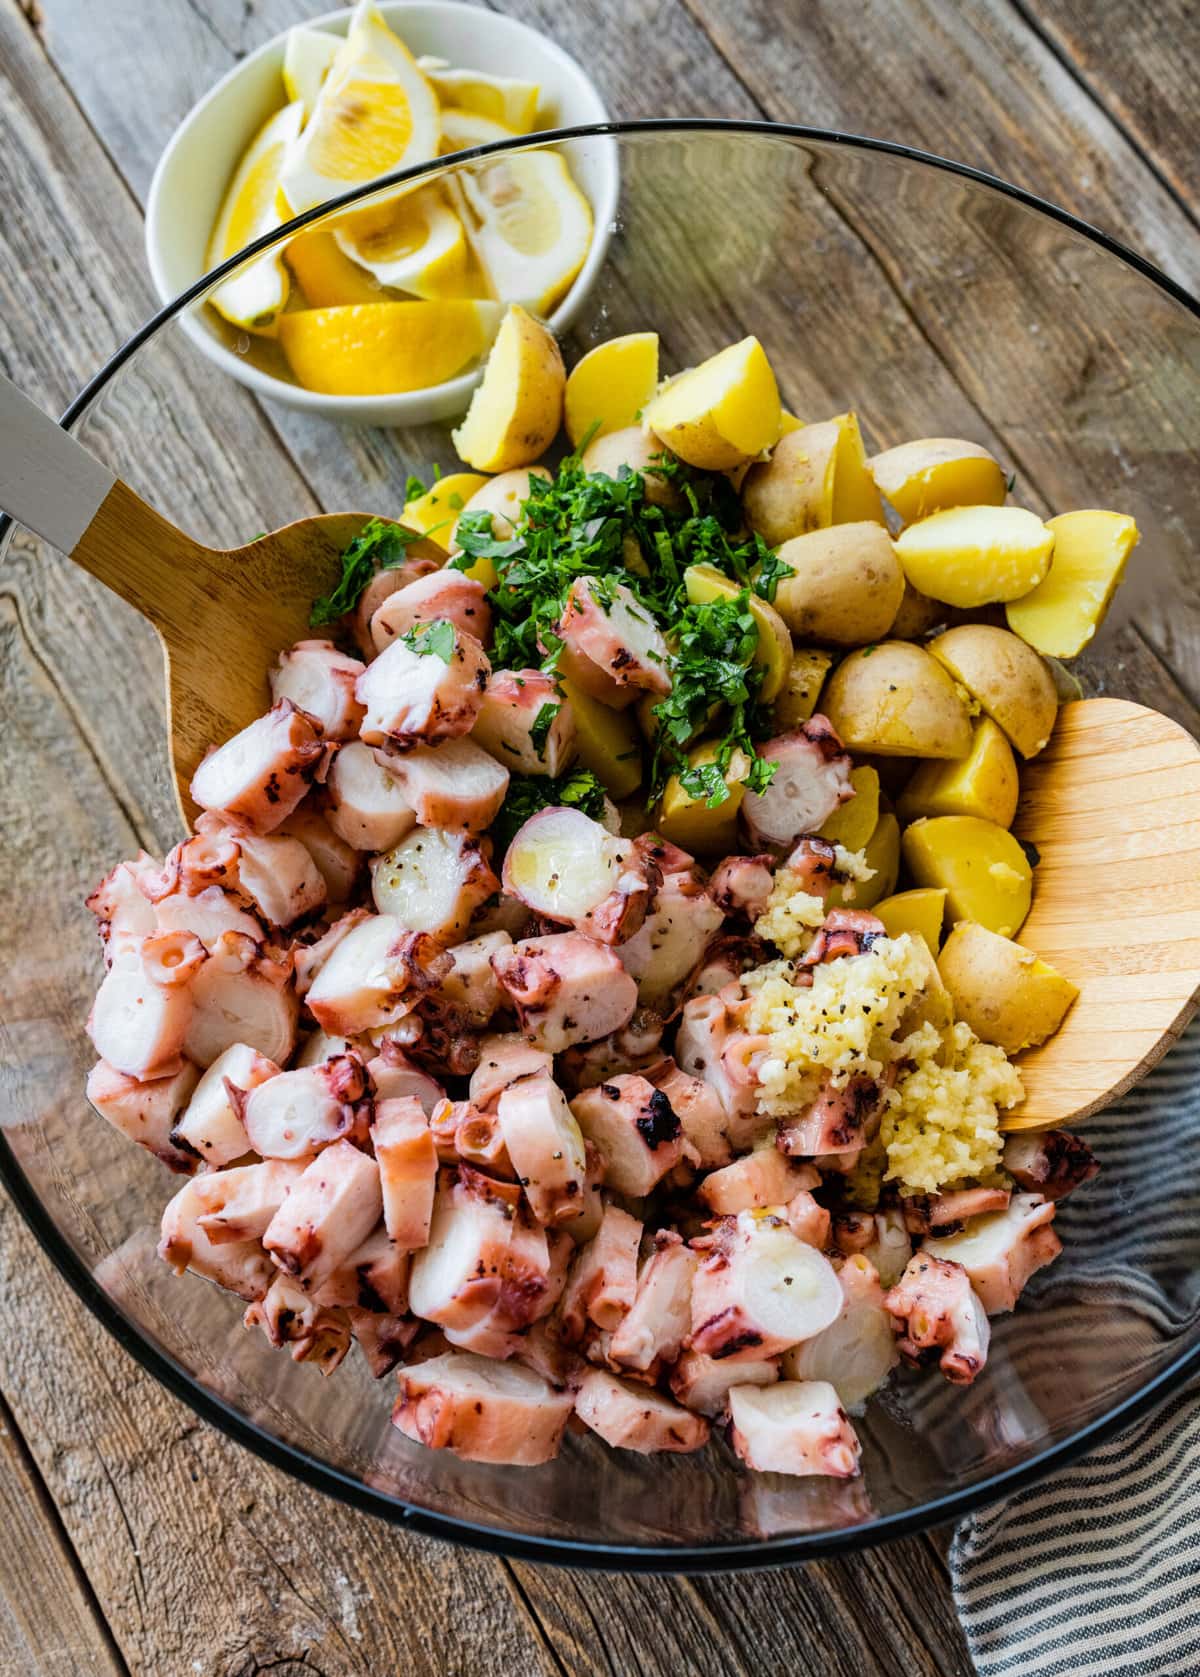 How to Make-Italian Octopus Salad Recipe with potatoes- mix all the ingredients together.